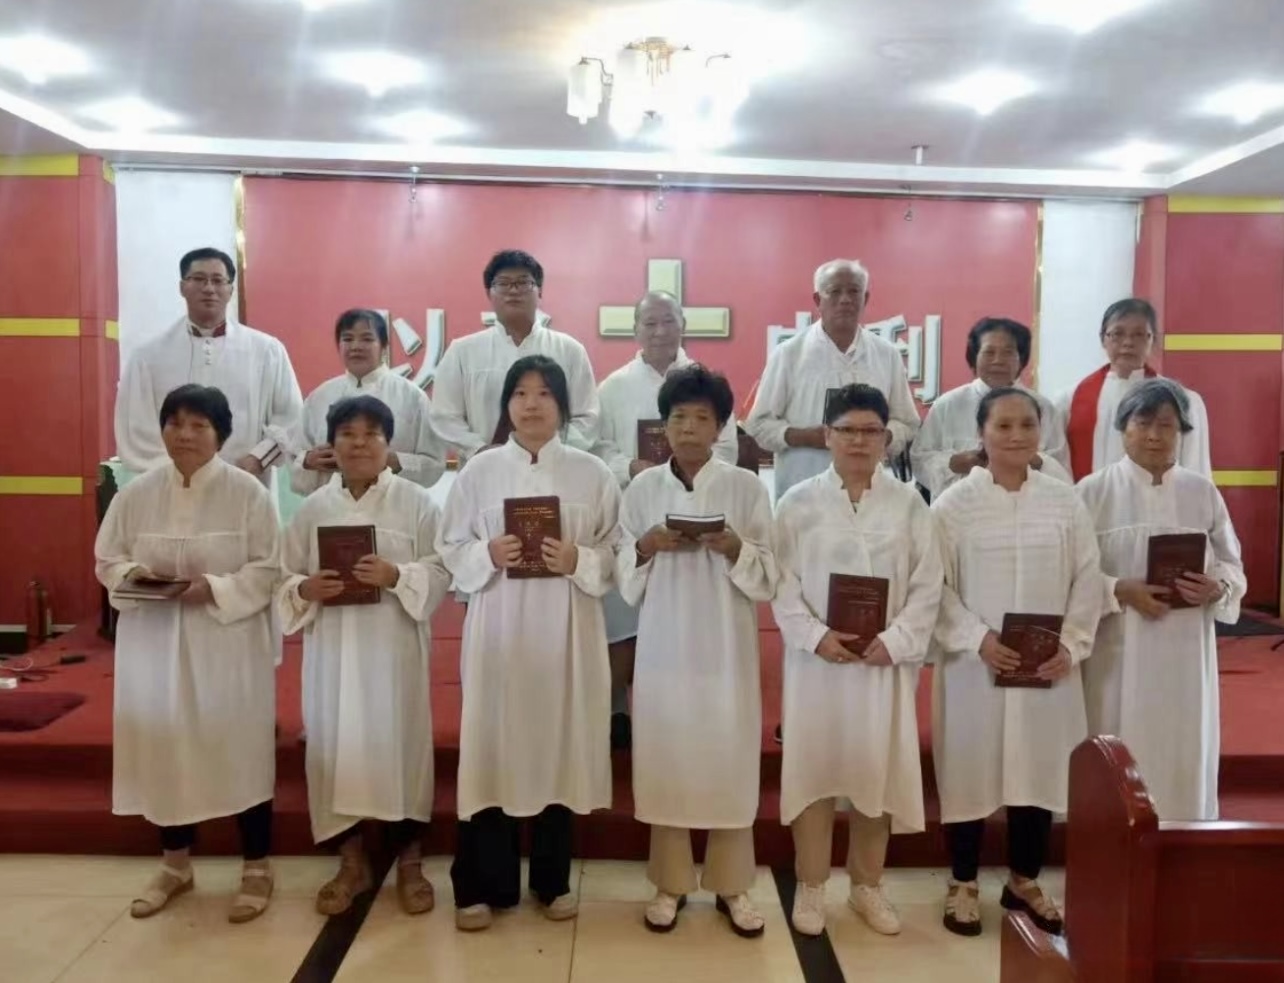 Group photo of 12 newly baptized believers with Rev. Yi Zaizhong, chairman and president of Yichun municipal CC&TSPM (the first from the top left), and church staff at the temporary site of Jesus Church on Ping'an Road in Yichun, Jiangxi, on August 27, 2023.